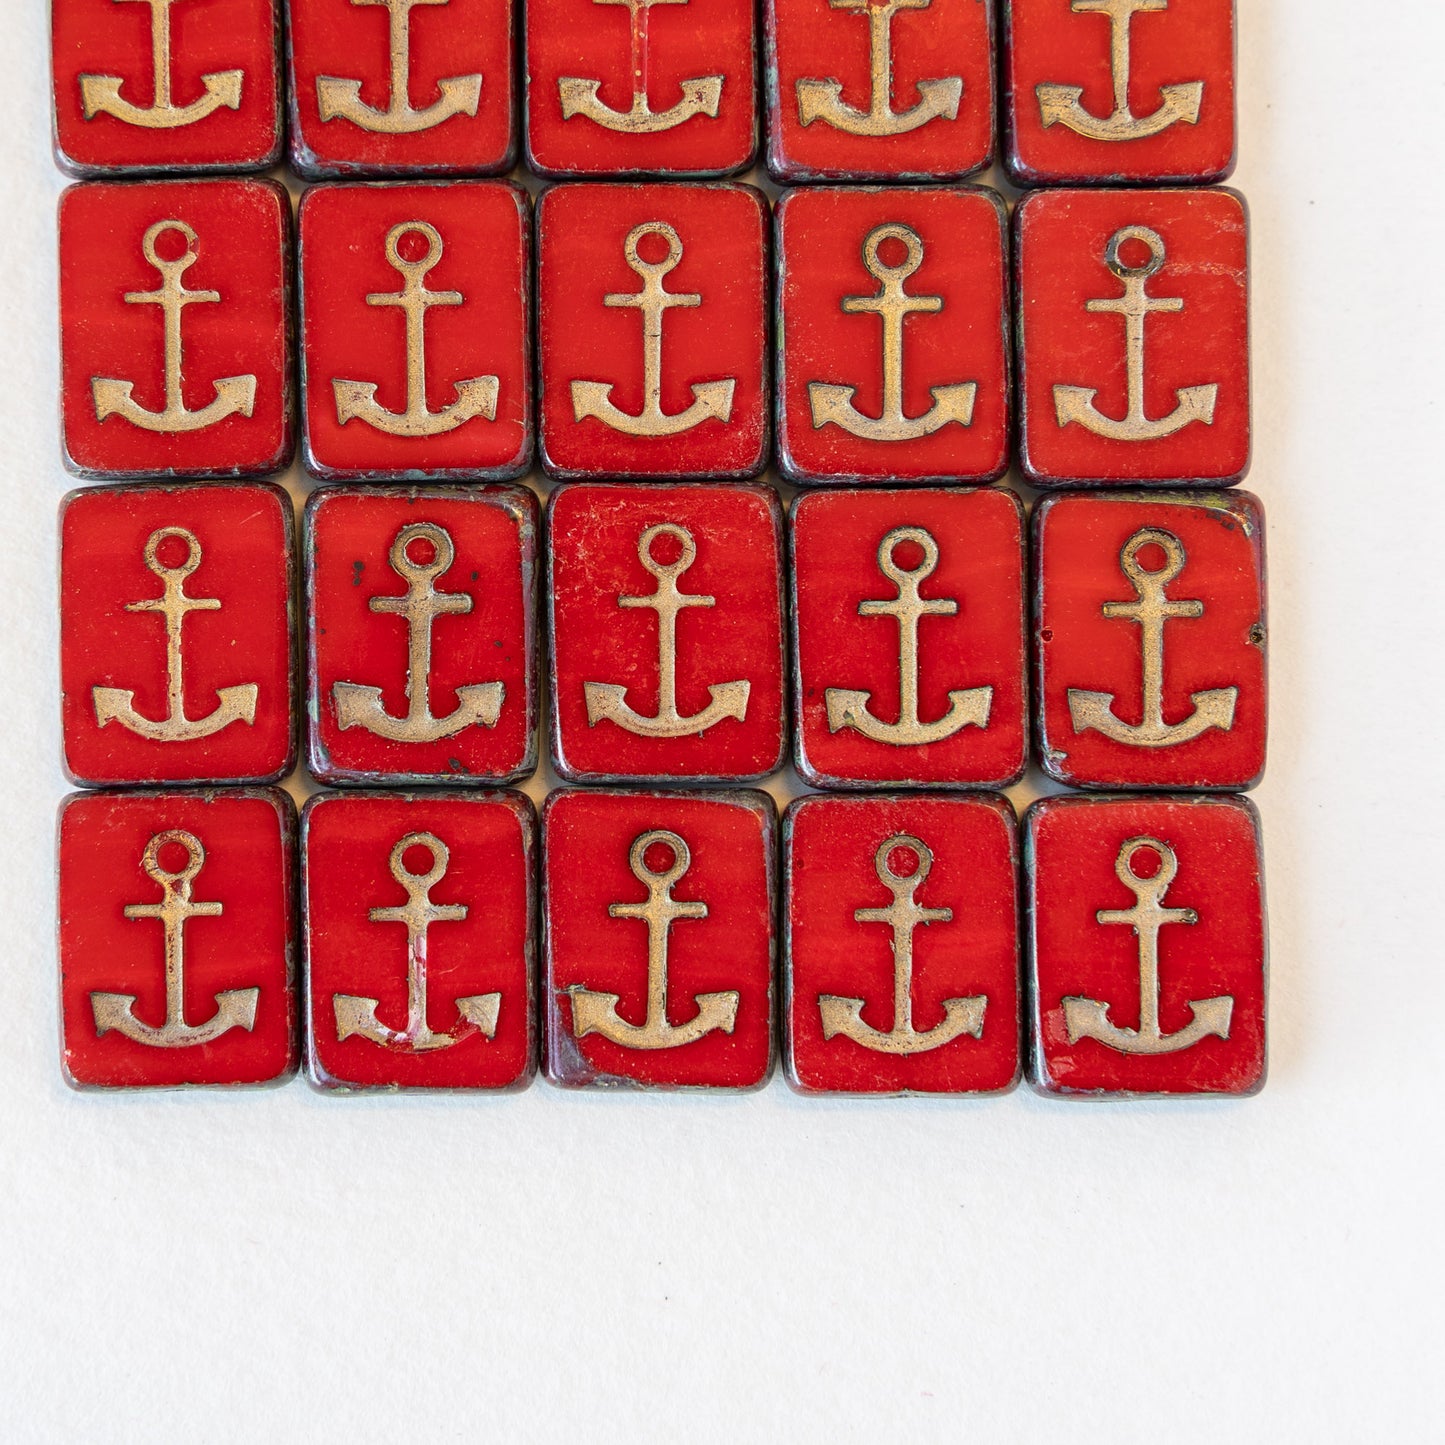 11x17mm Glass Anchor Beads - Red with Gold Wash